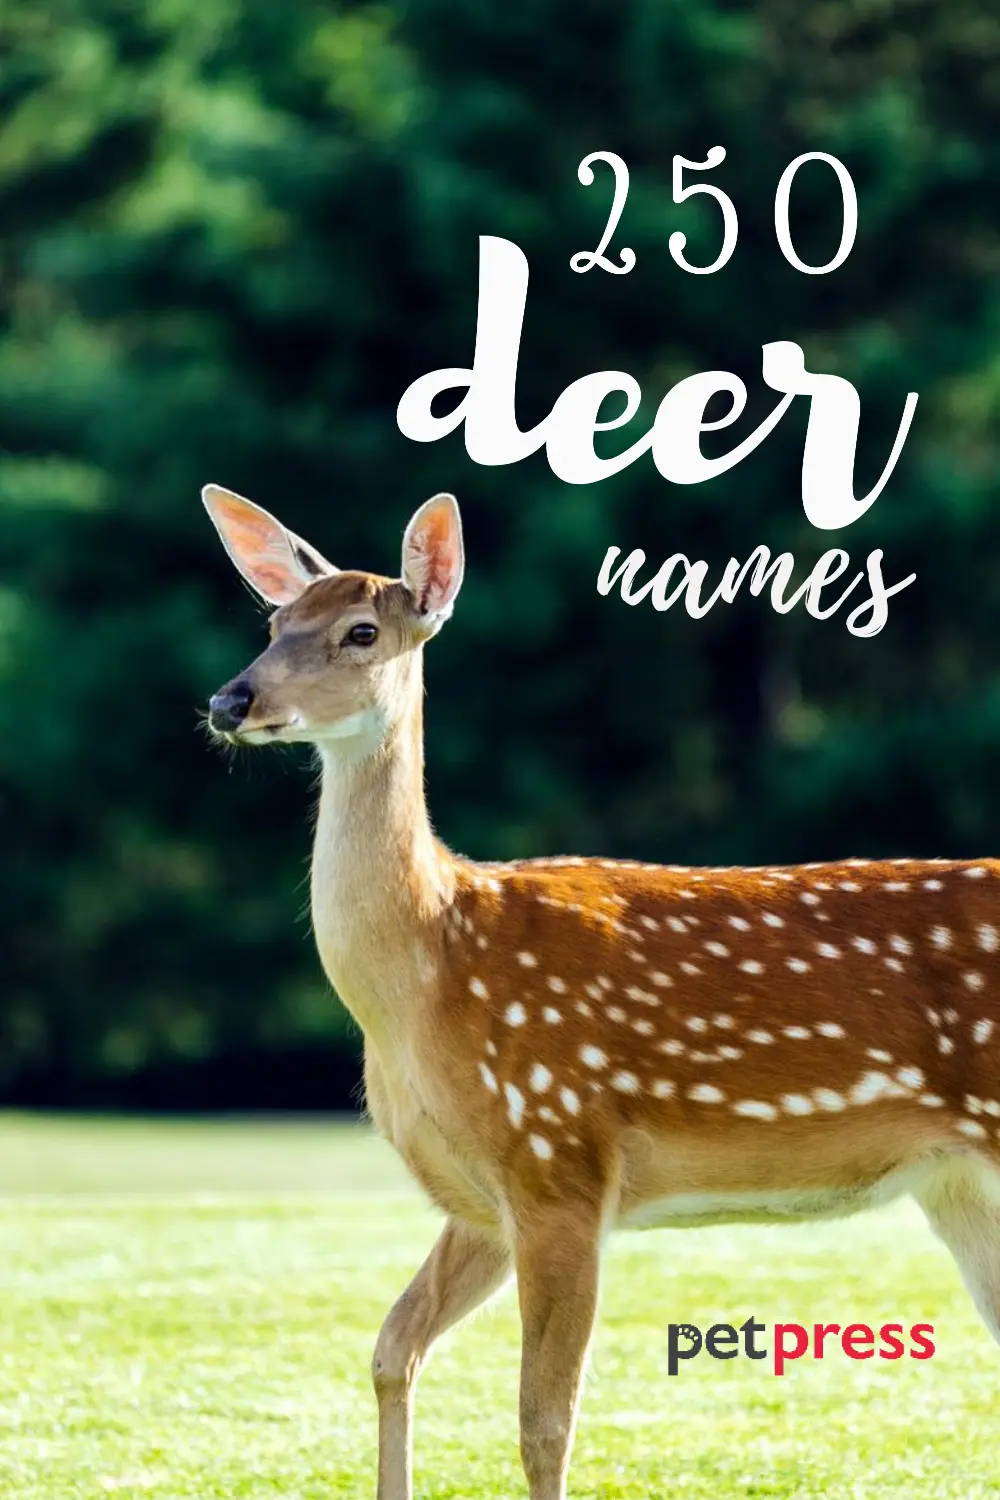 Whats a good name for a female deer?